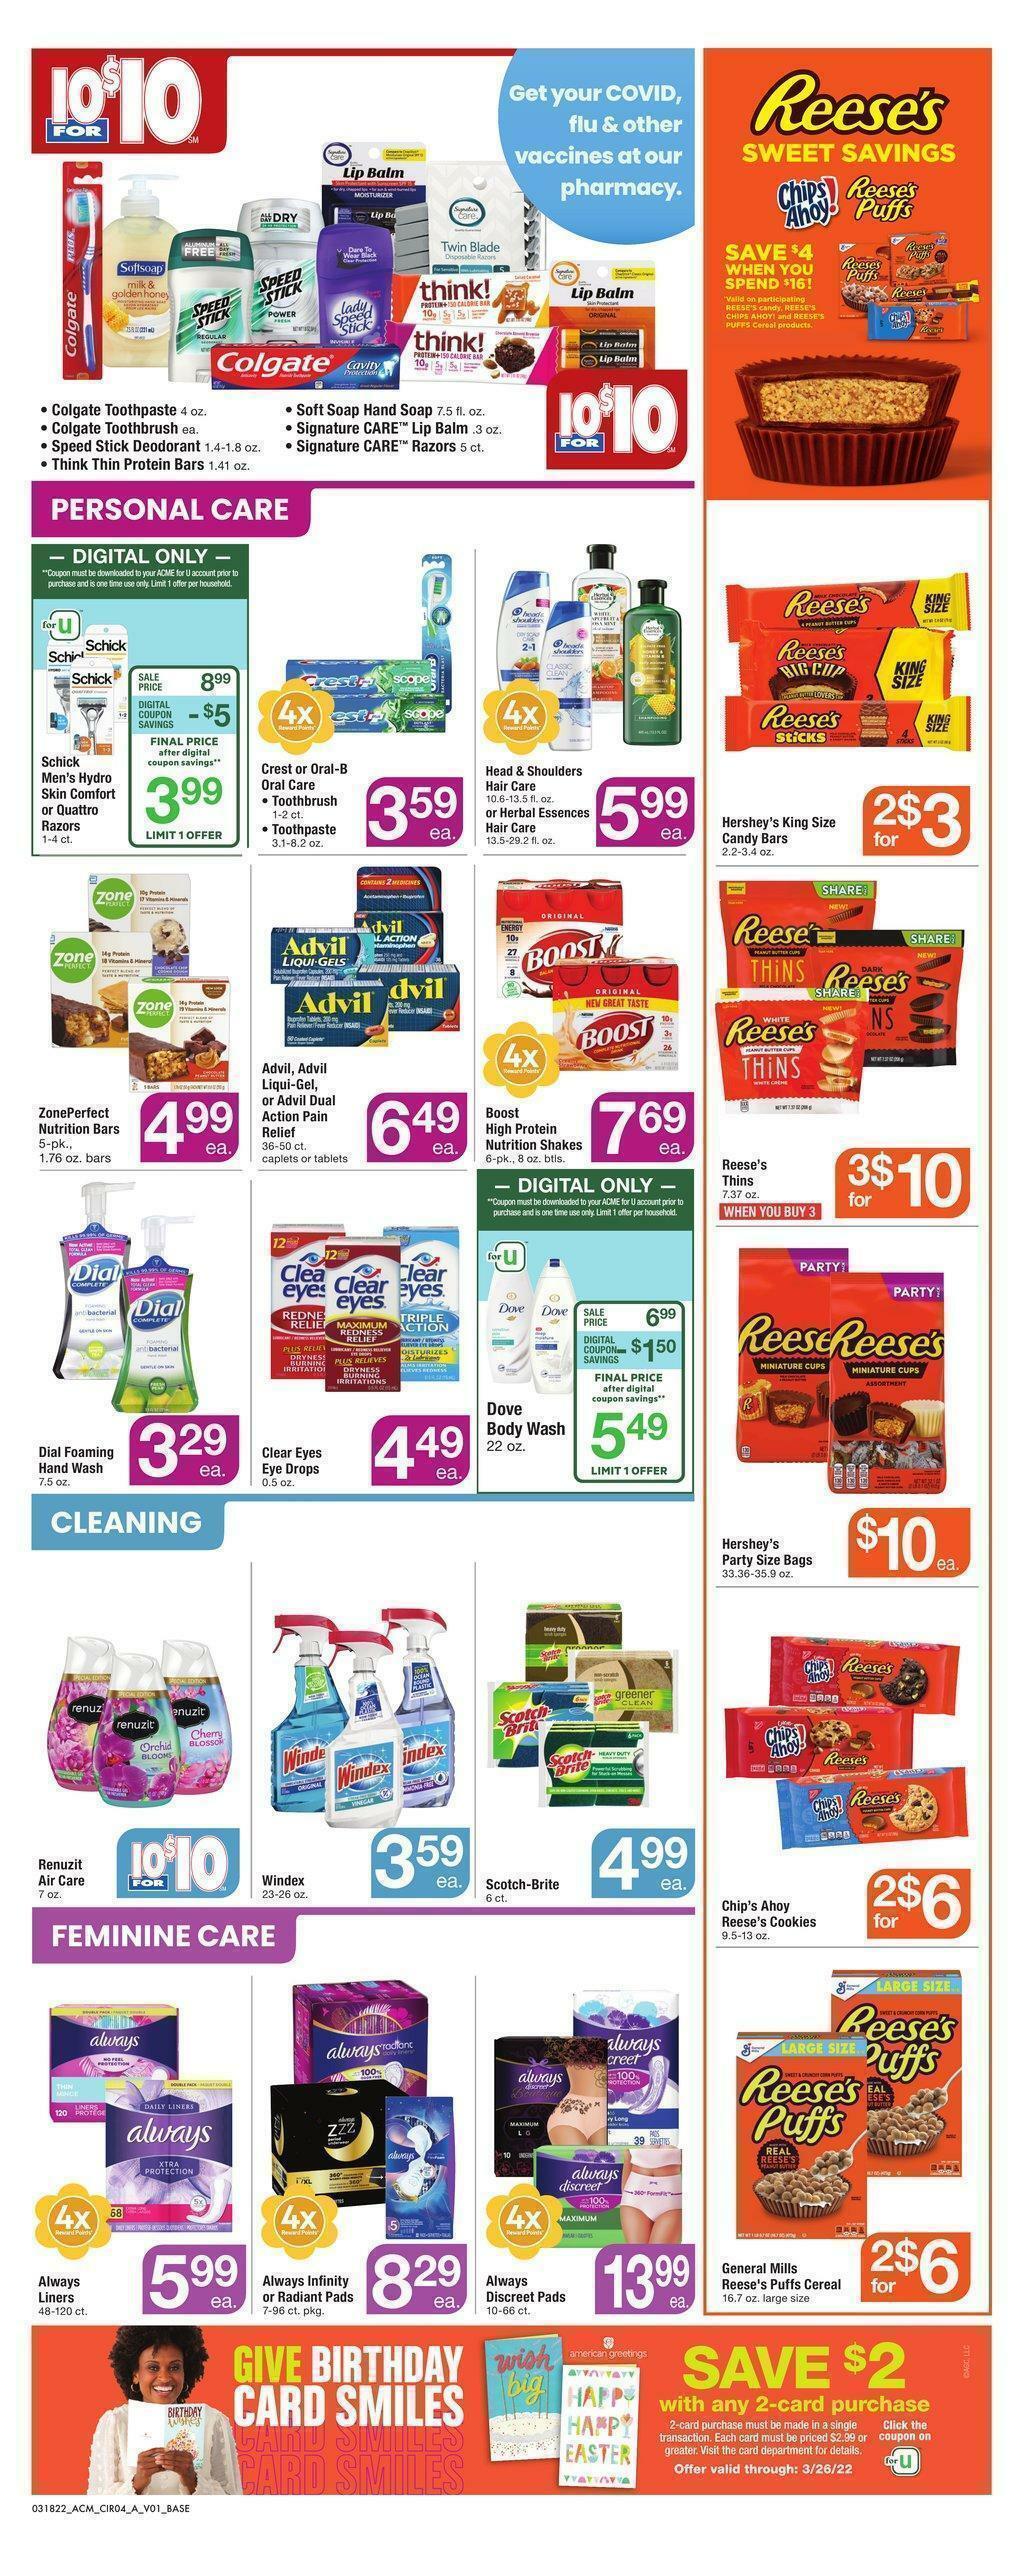 ACME Markets Weekly Ad from March 18